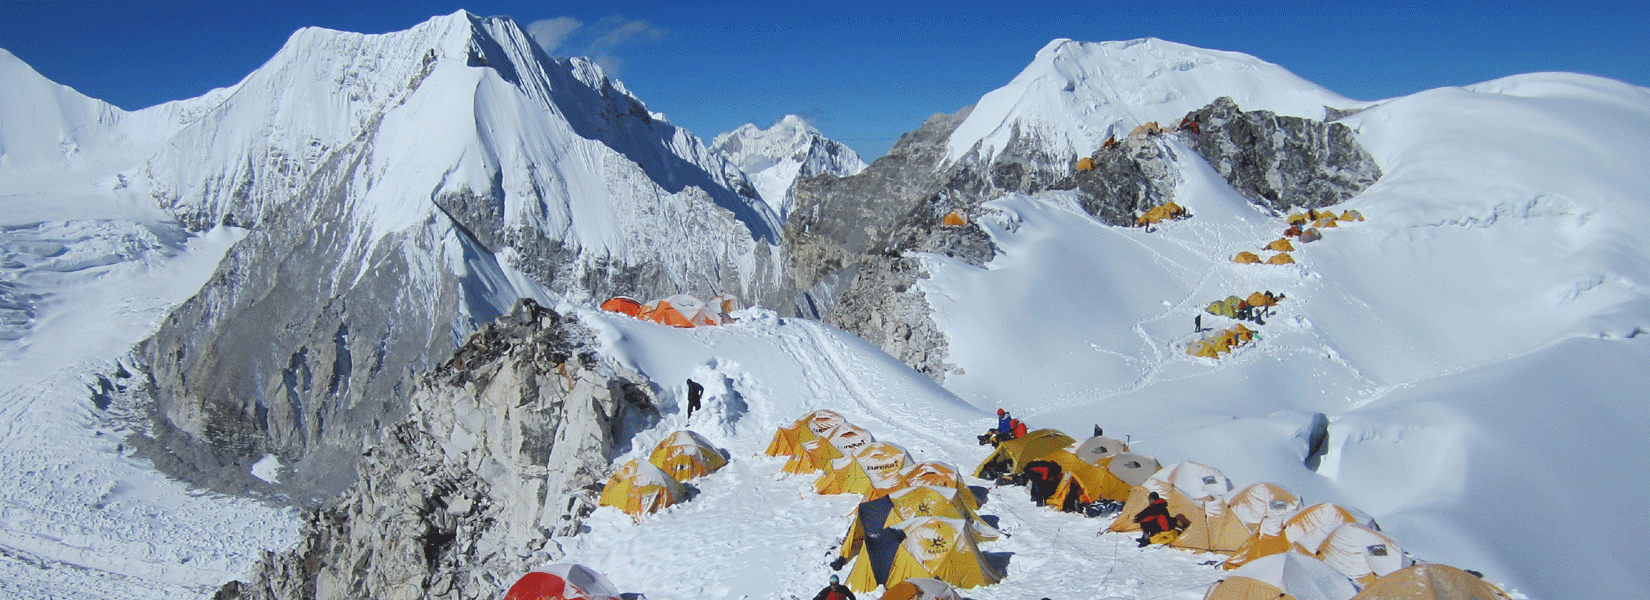 mountaineering in nepal rugged trails